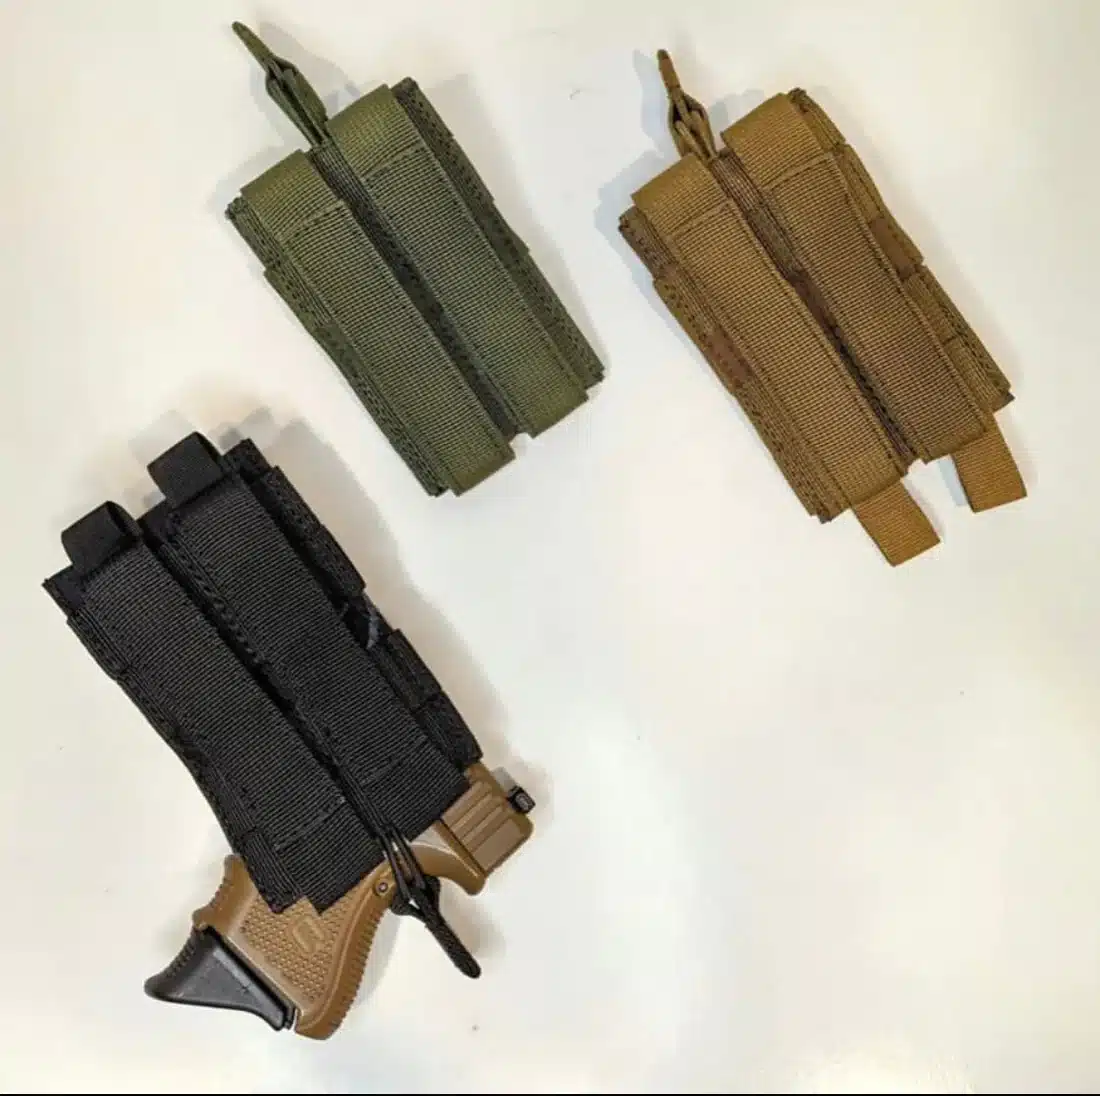 Universal MOLLE Holster Attachment Pouch